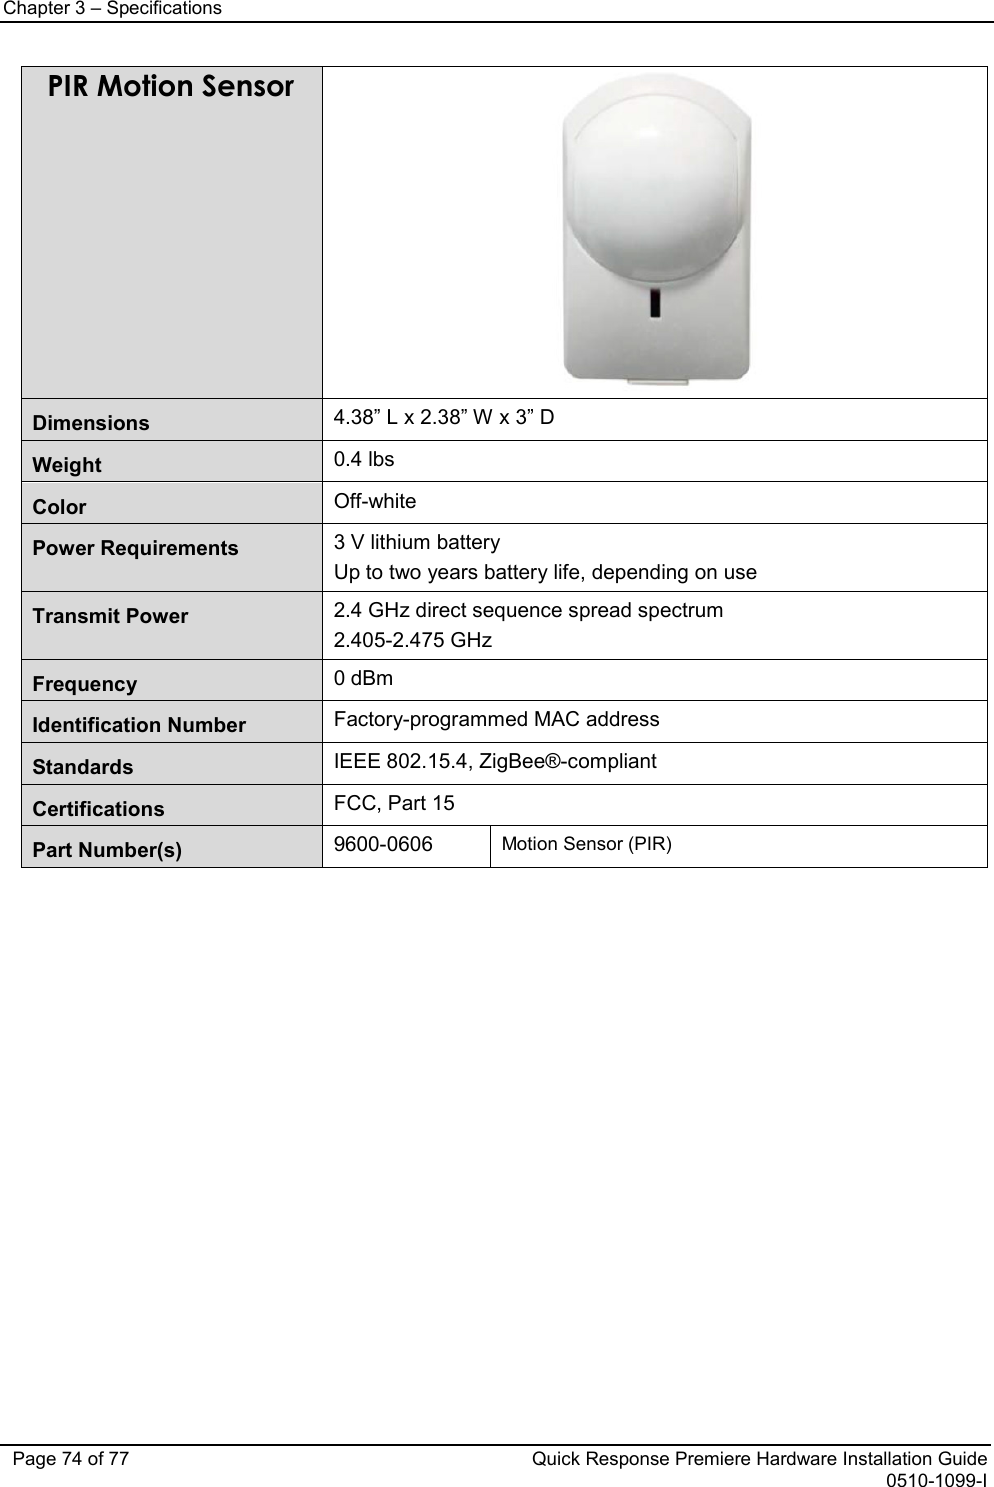 Chapter 3 – Specifications   Page 74 of 77 Quick Response Premiere Hardware Installation Guide 0510-1099-I PIR Motion Sensor  Dimensions 4.38” L x 2.38” W x 3” D Weight 0.4 lbs Color Off-white Power Requirements 3 V lithium battery Up to two years battery life, depending on use Transmit Power 2.4 GHz direct sequence spread spectrum 2.405-2.475 GHz Frequency 0 dBm Identification Number Factory-programmed MAC address Standards IEEE 802.15.4, ZigBee®-compliant Certifications FCC, Part 15 Part Number(s)  9600-0606 Motion Sensor (PIR)                          